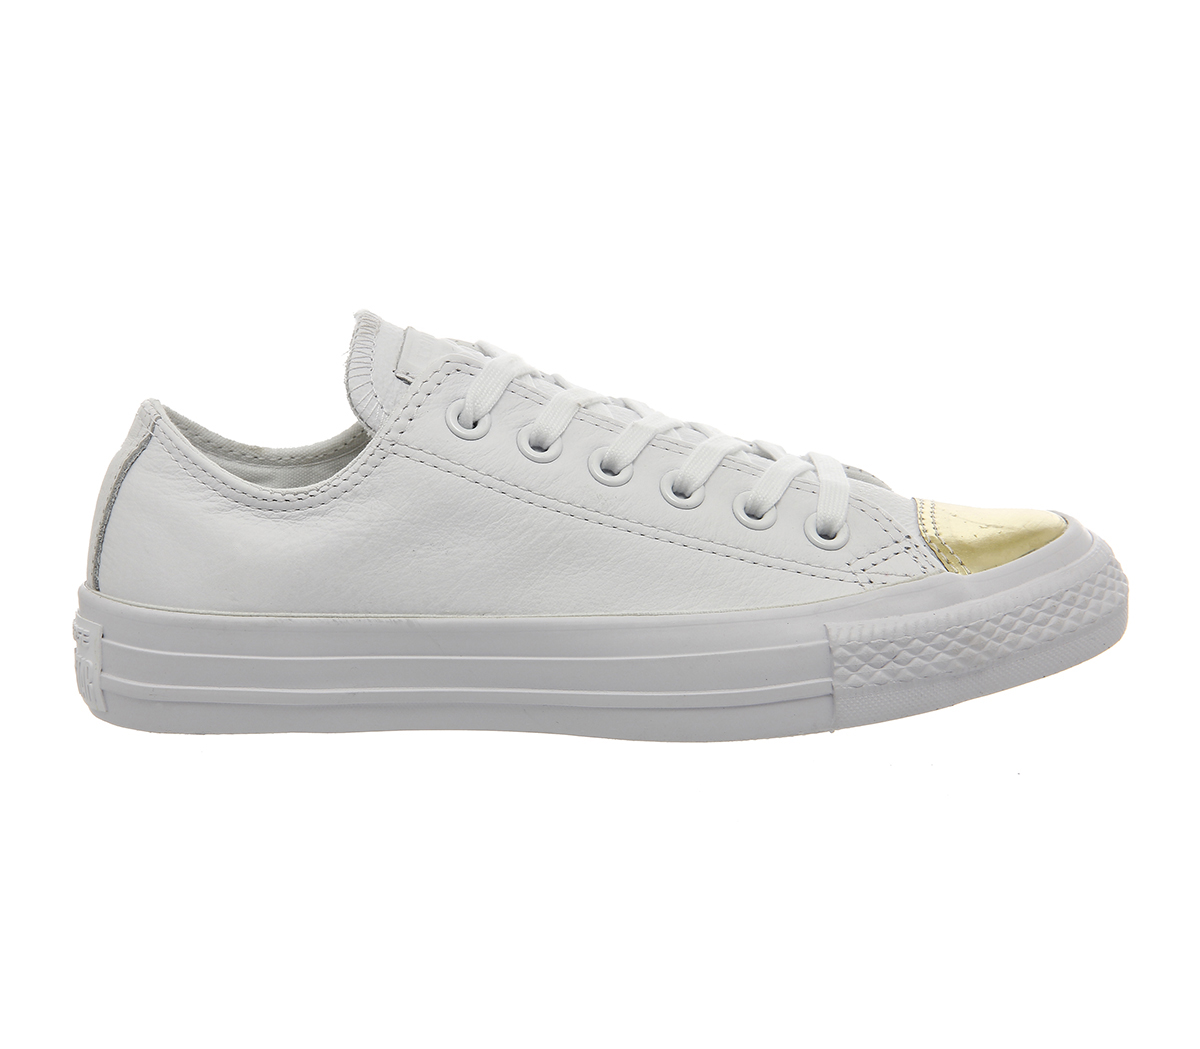 Converse All Star Low Leather Trainers White Mono Chrome Gold Toe ...